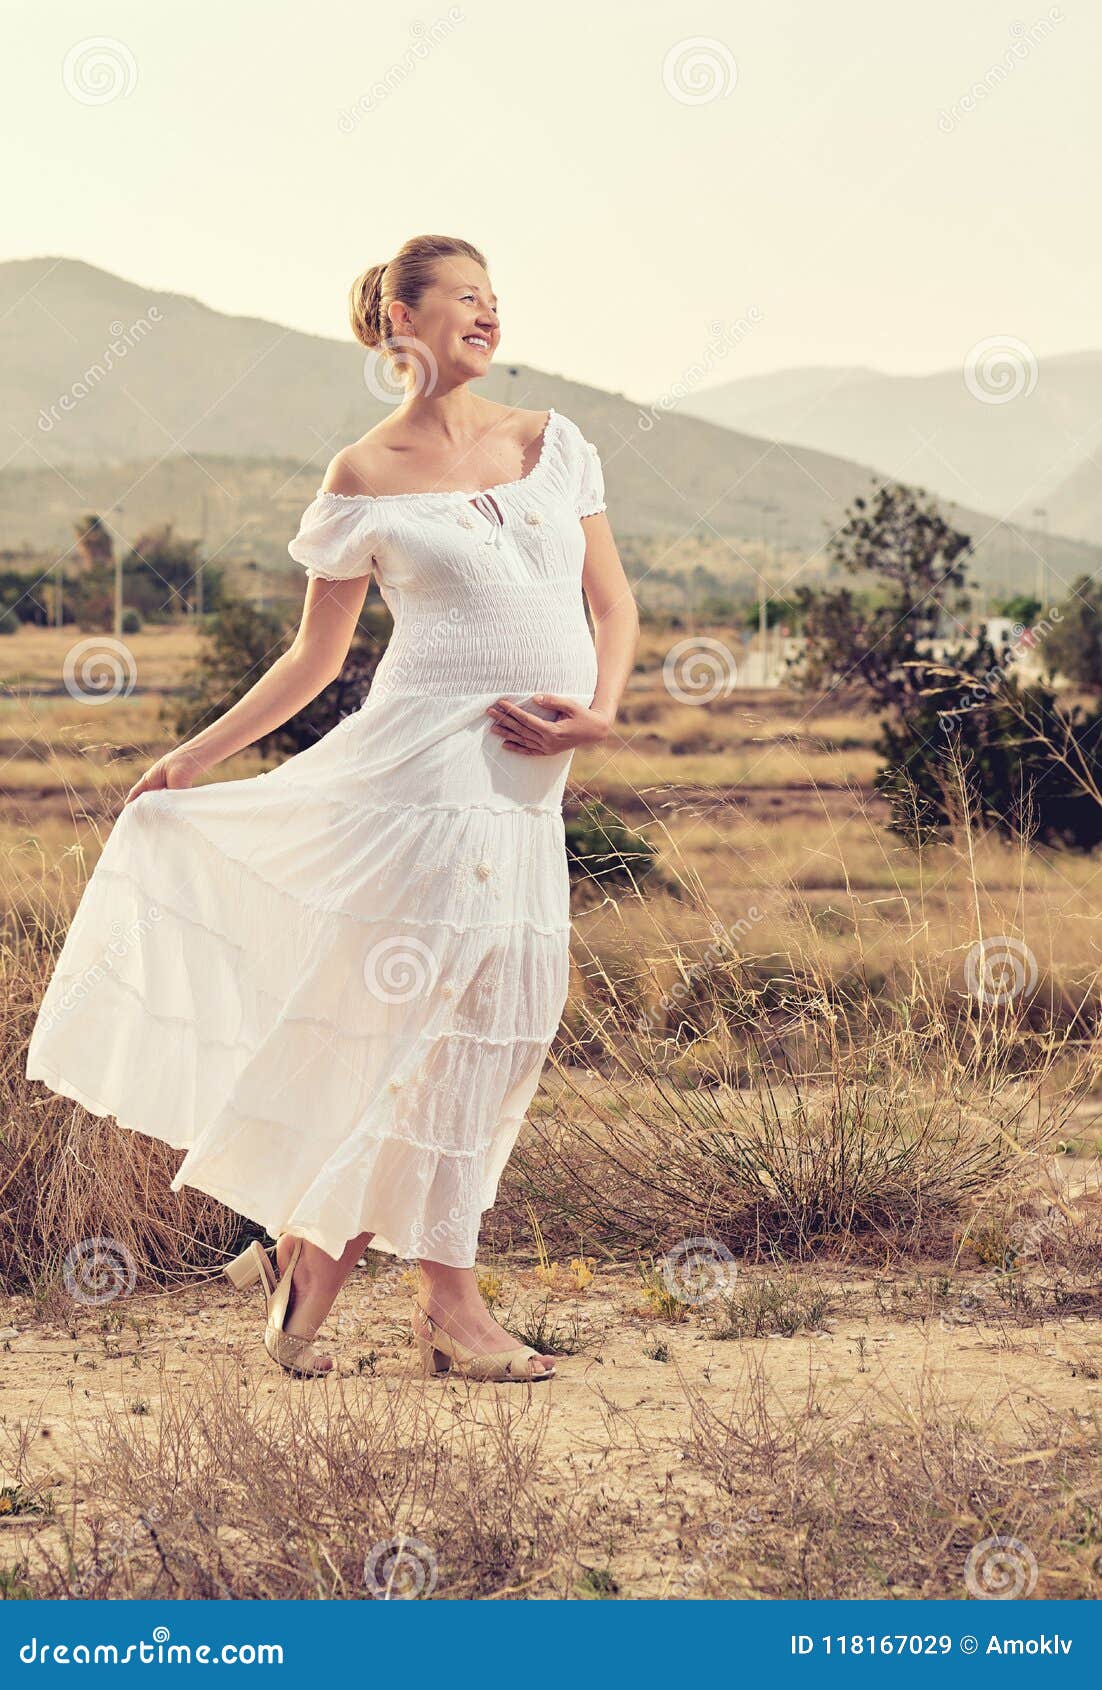 Attractive Pregnant Woman Outdoors Stock Image Image Of